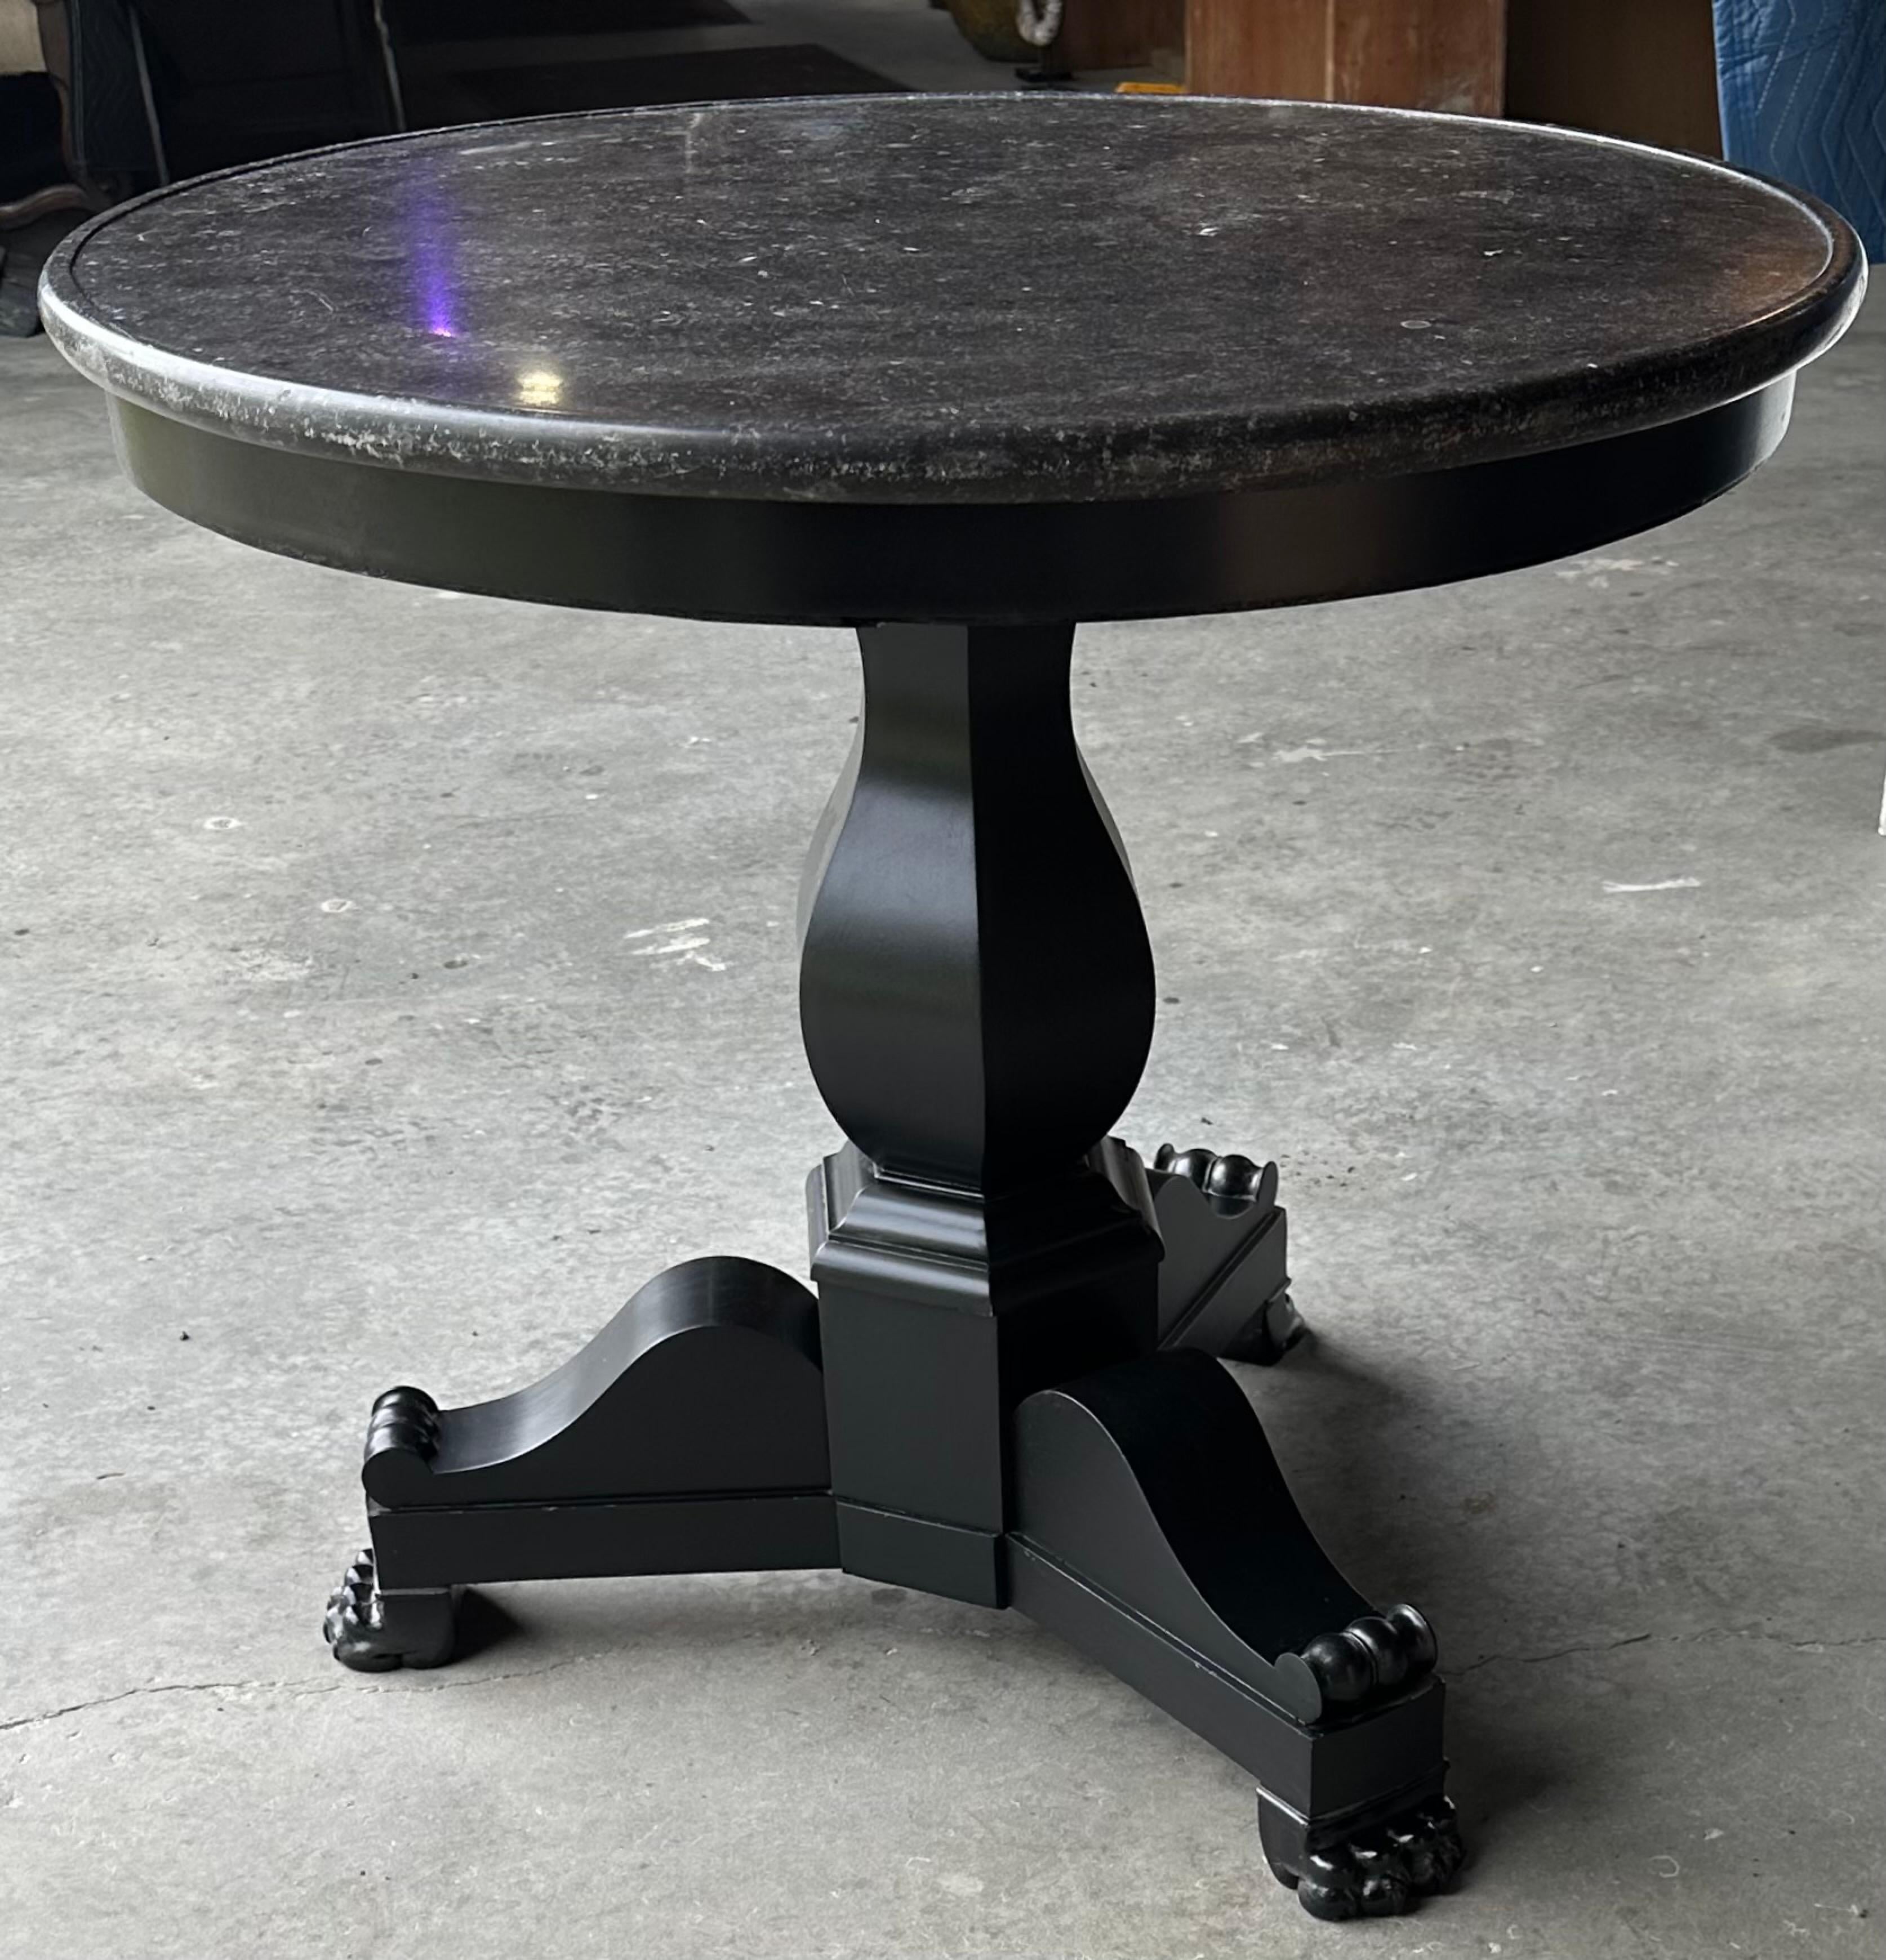 A very handsome classical Empire-style round center table with a dark gray/black marble top, raised on a hand turned ebonized black center pedestal.  The table lends itself to be used for a breakfast table, side table, or an occasional table..
Base: